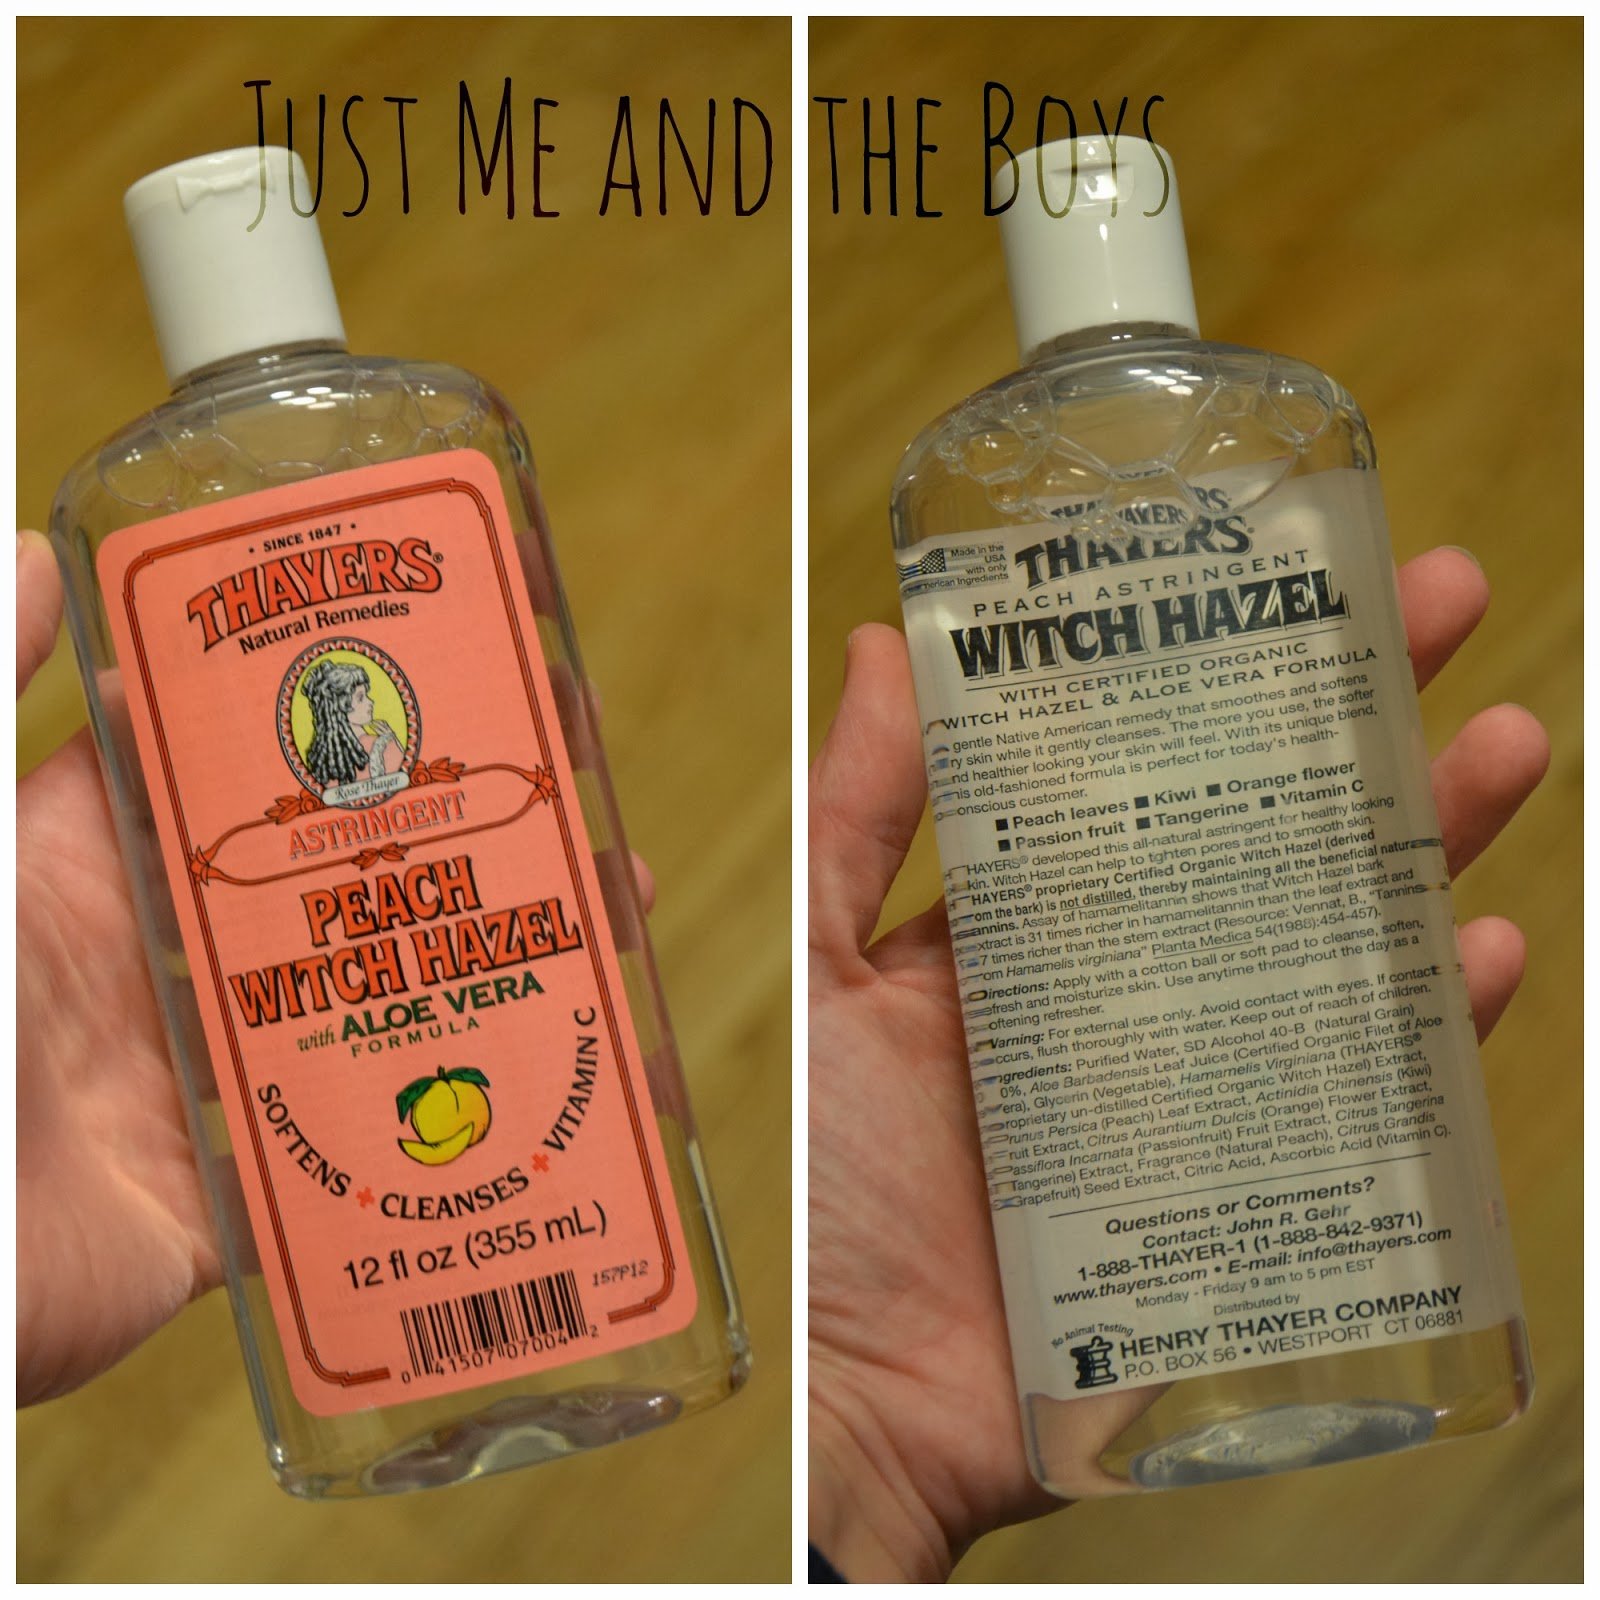 Just Me and the Boys: Thayers Natural Remedies Witch Hazel ...